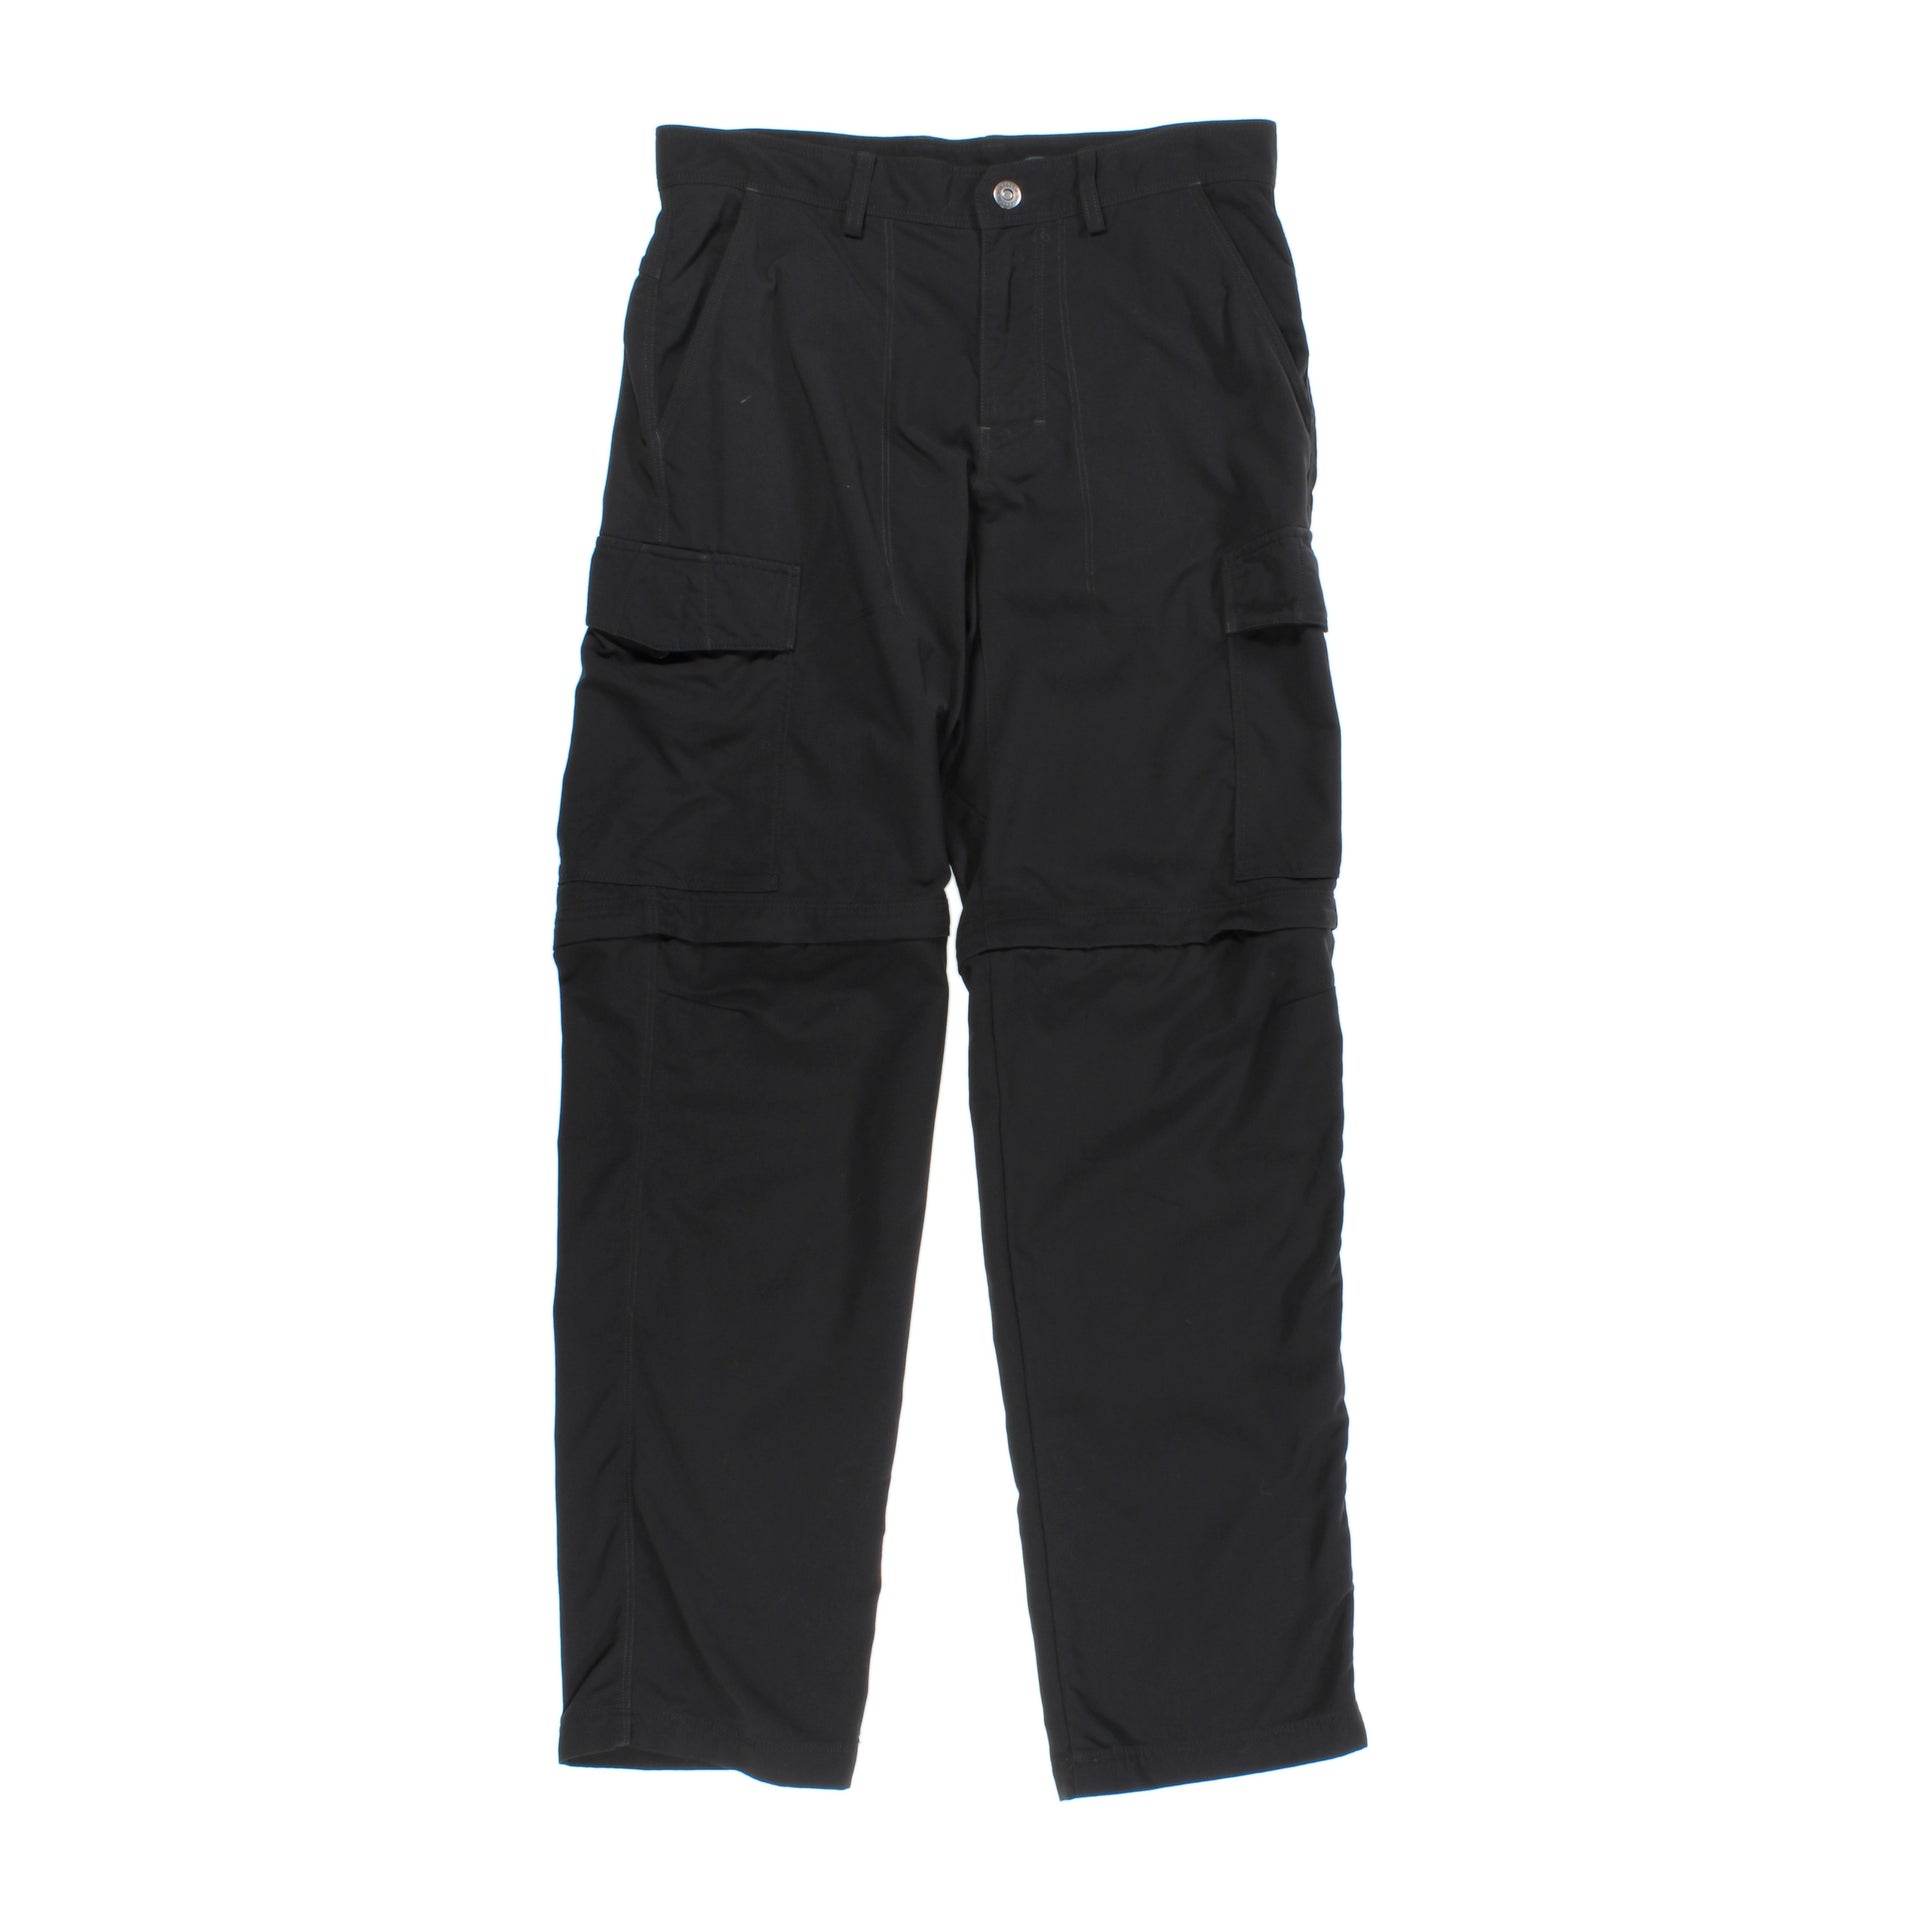 Patagonia Roving Zip-Off Pants Reviews - Trailspace